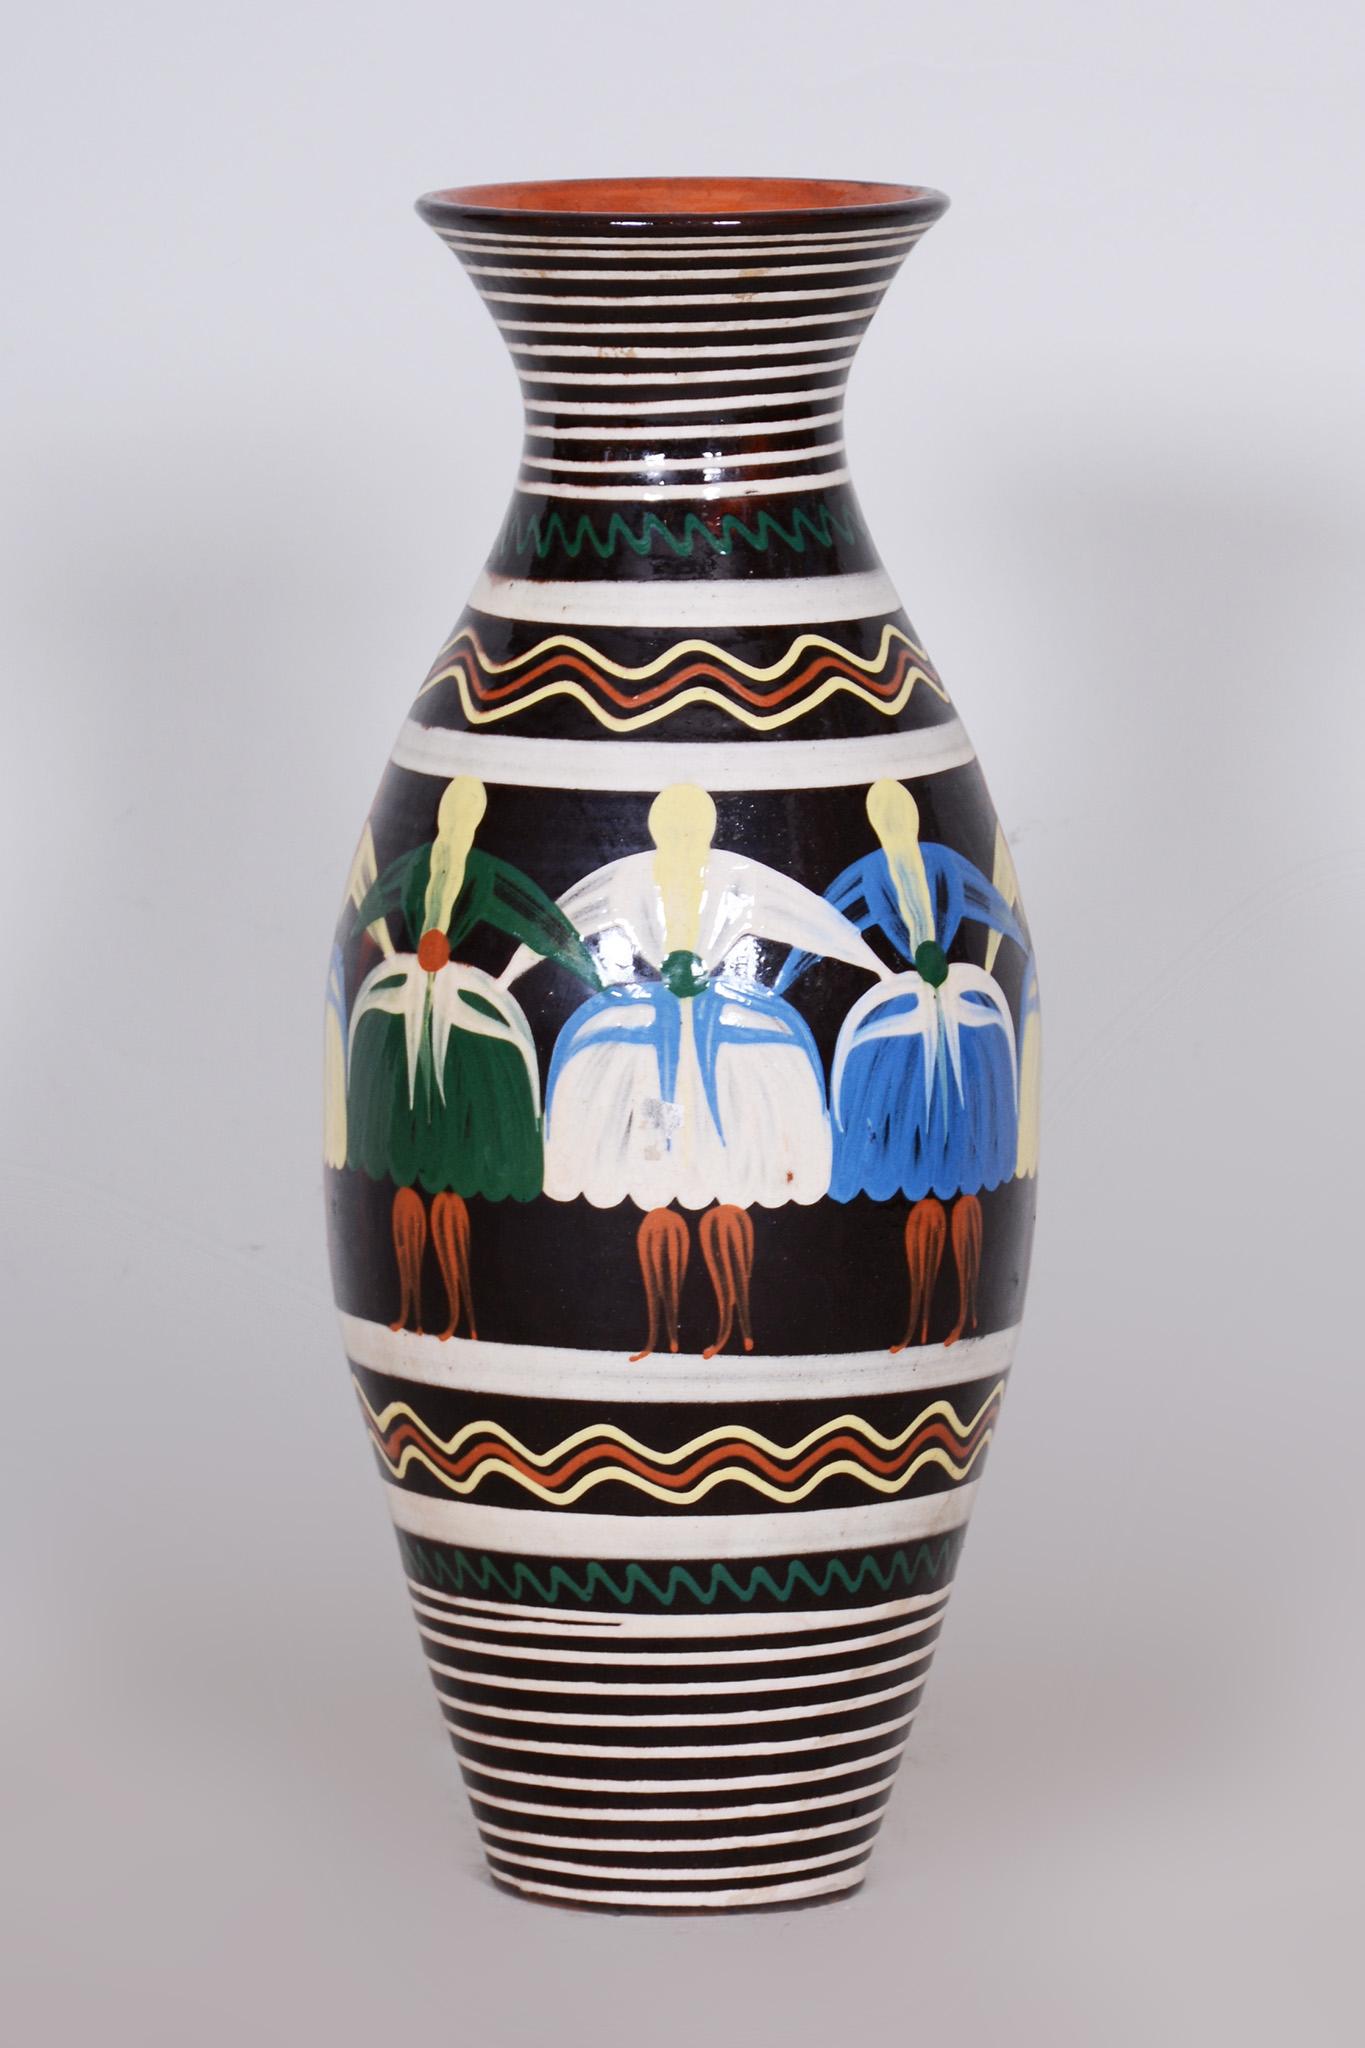 20th Century Art Deco Vase Made in 1940s Czechia, Hand Painted Slovak Motifs For Sale